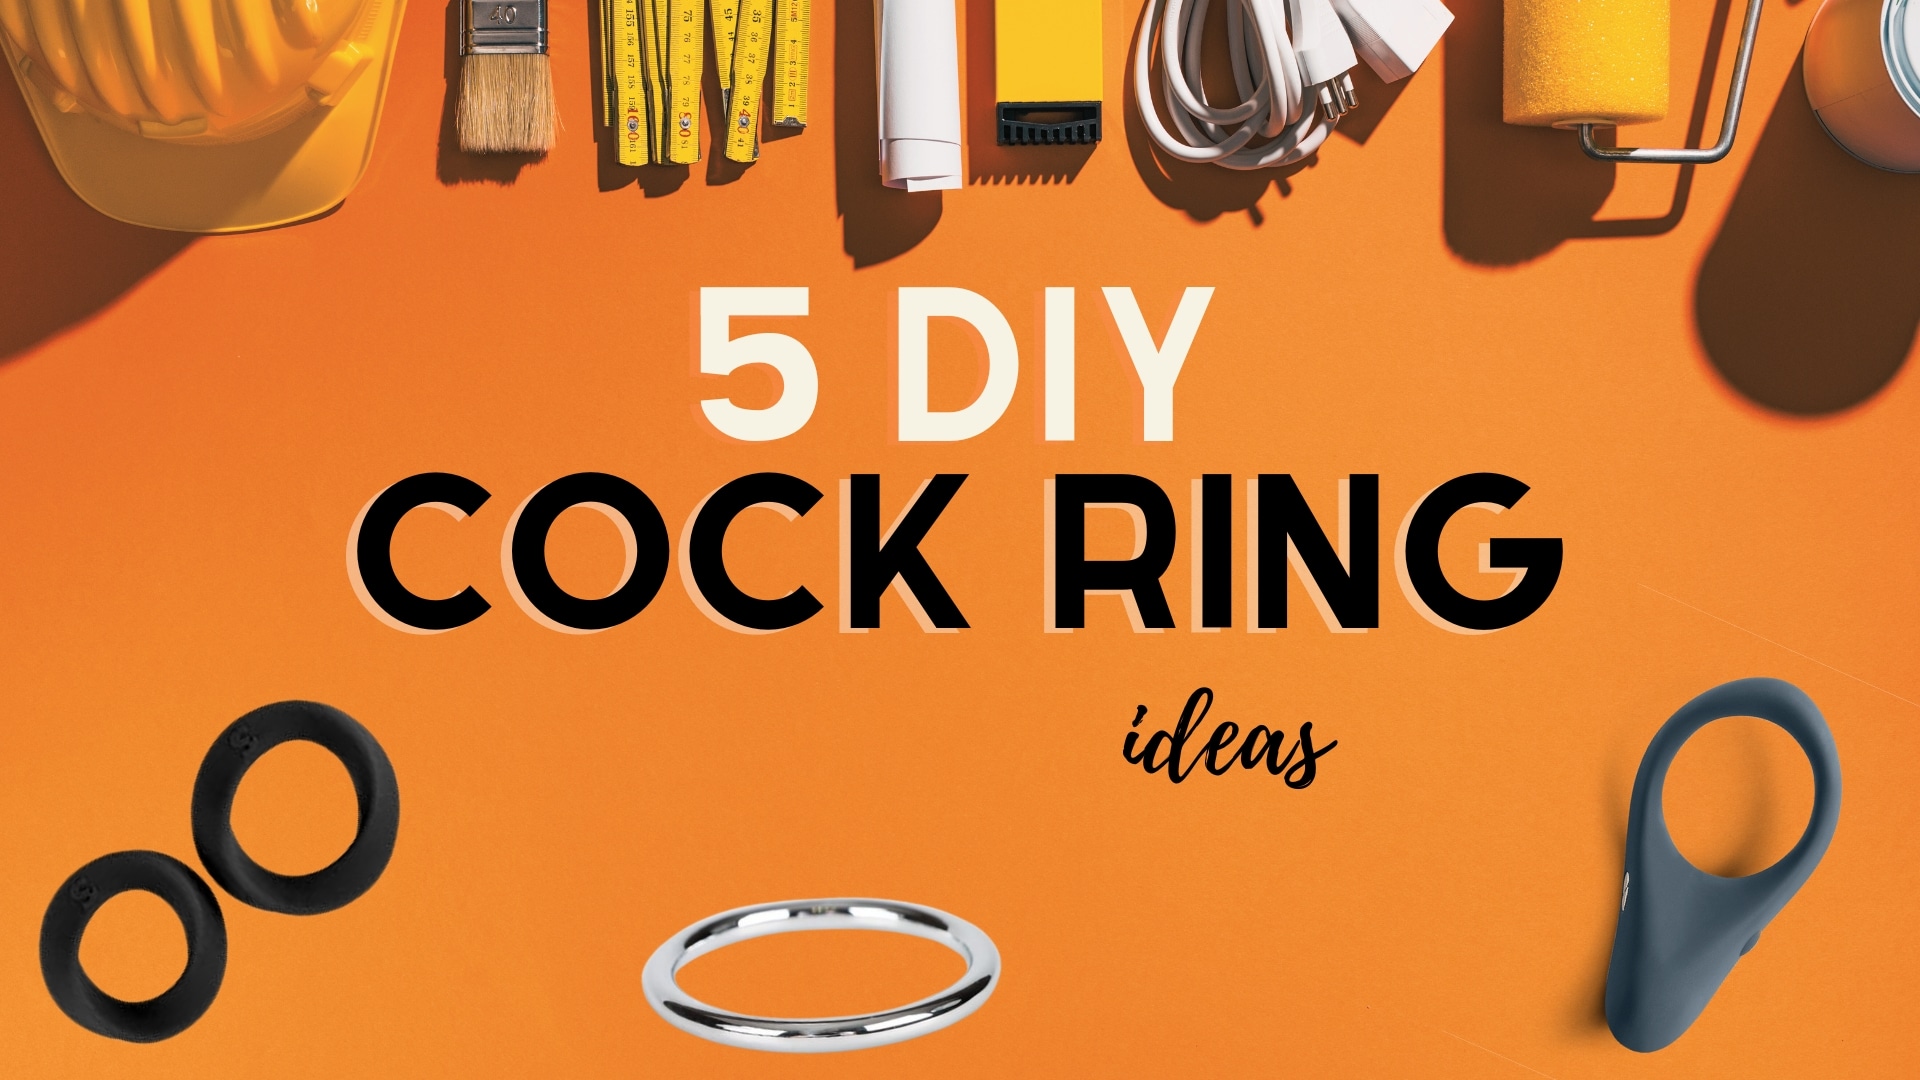 DIY Cock Ring Ideas: How to make one at home